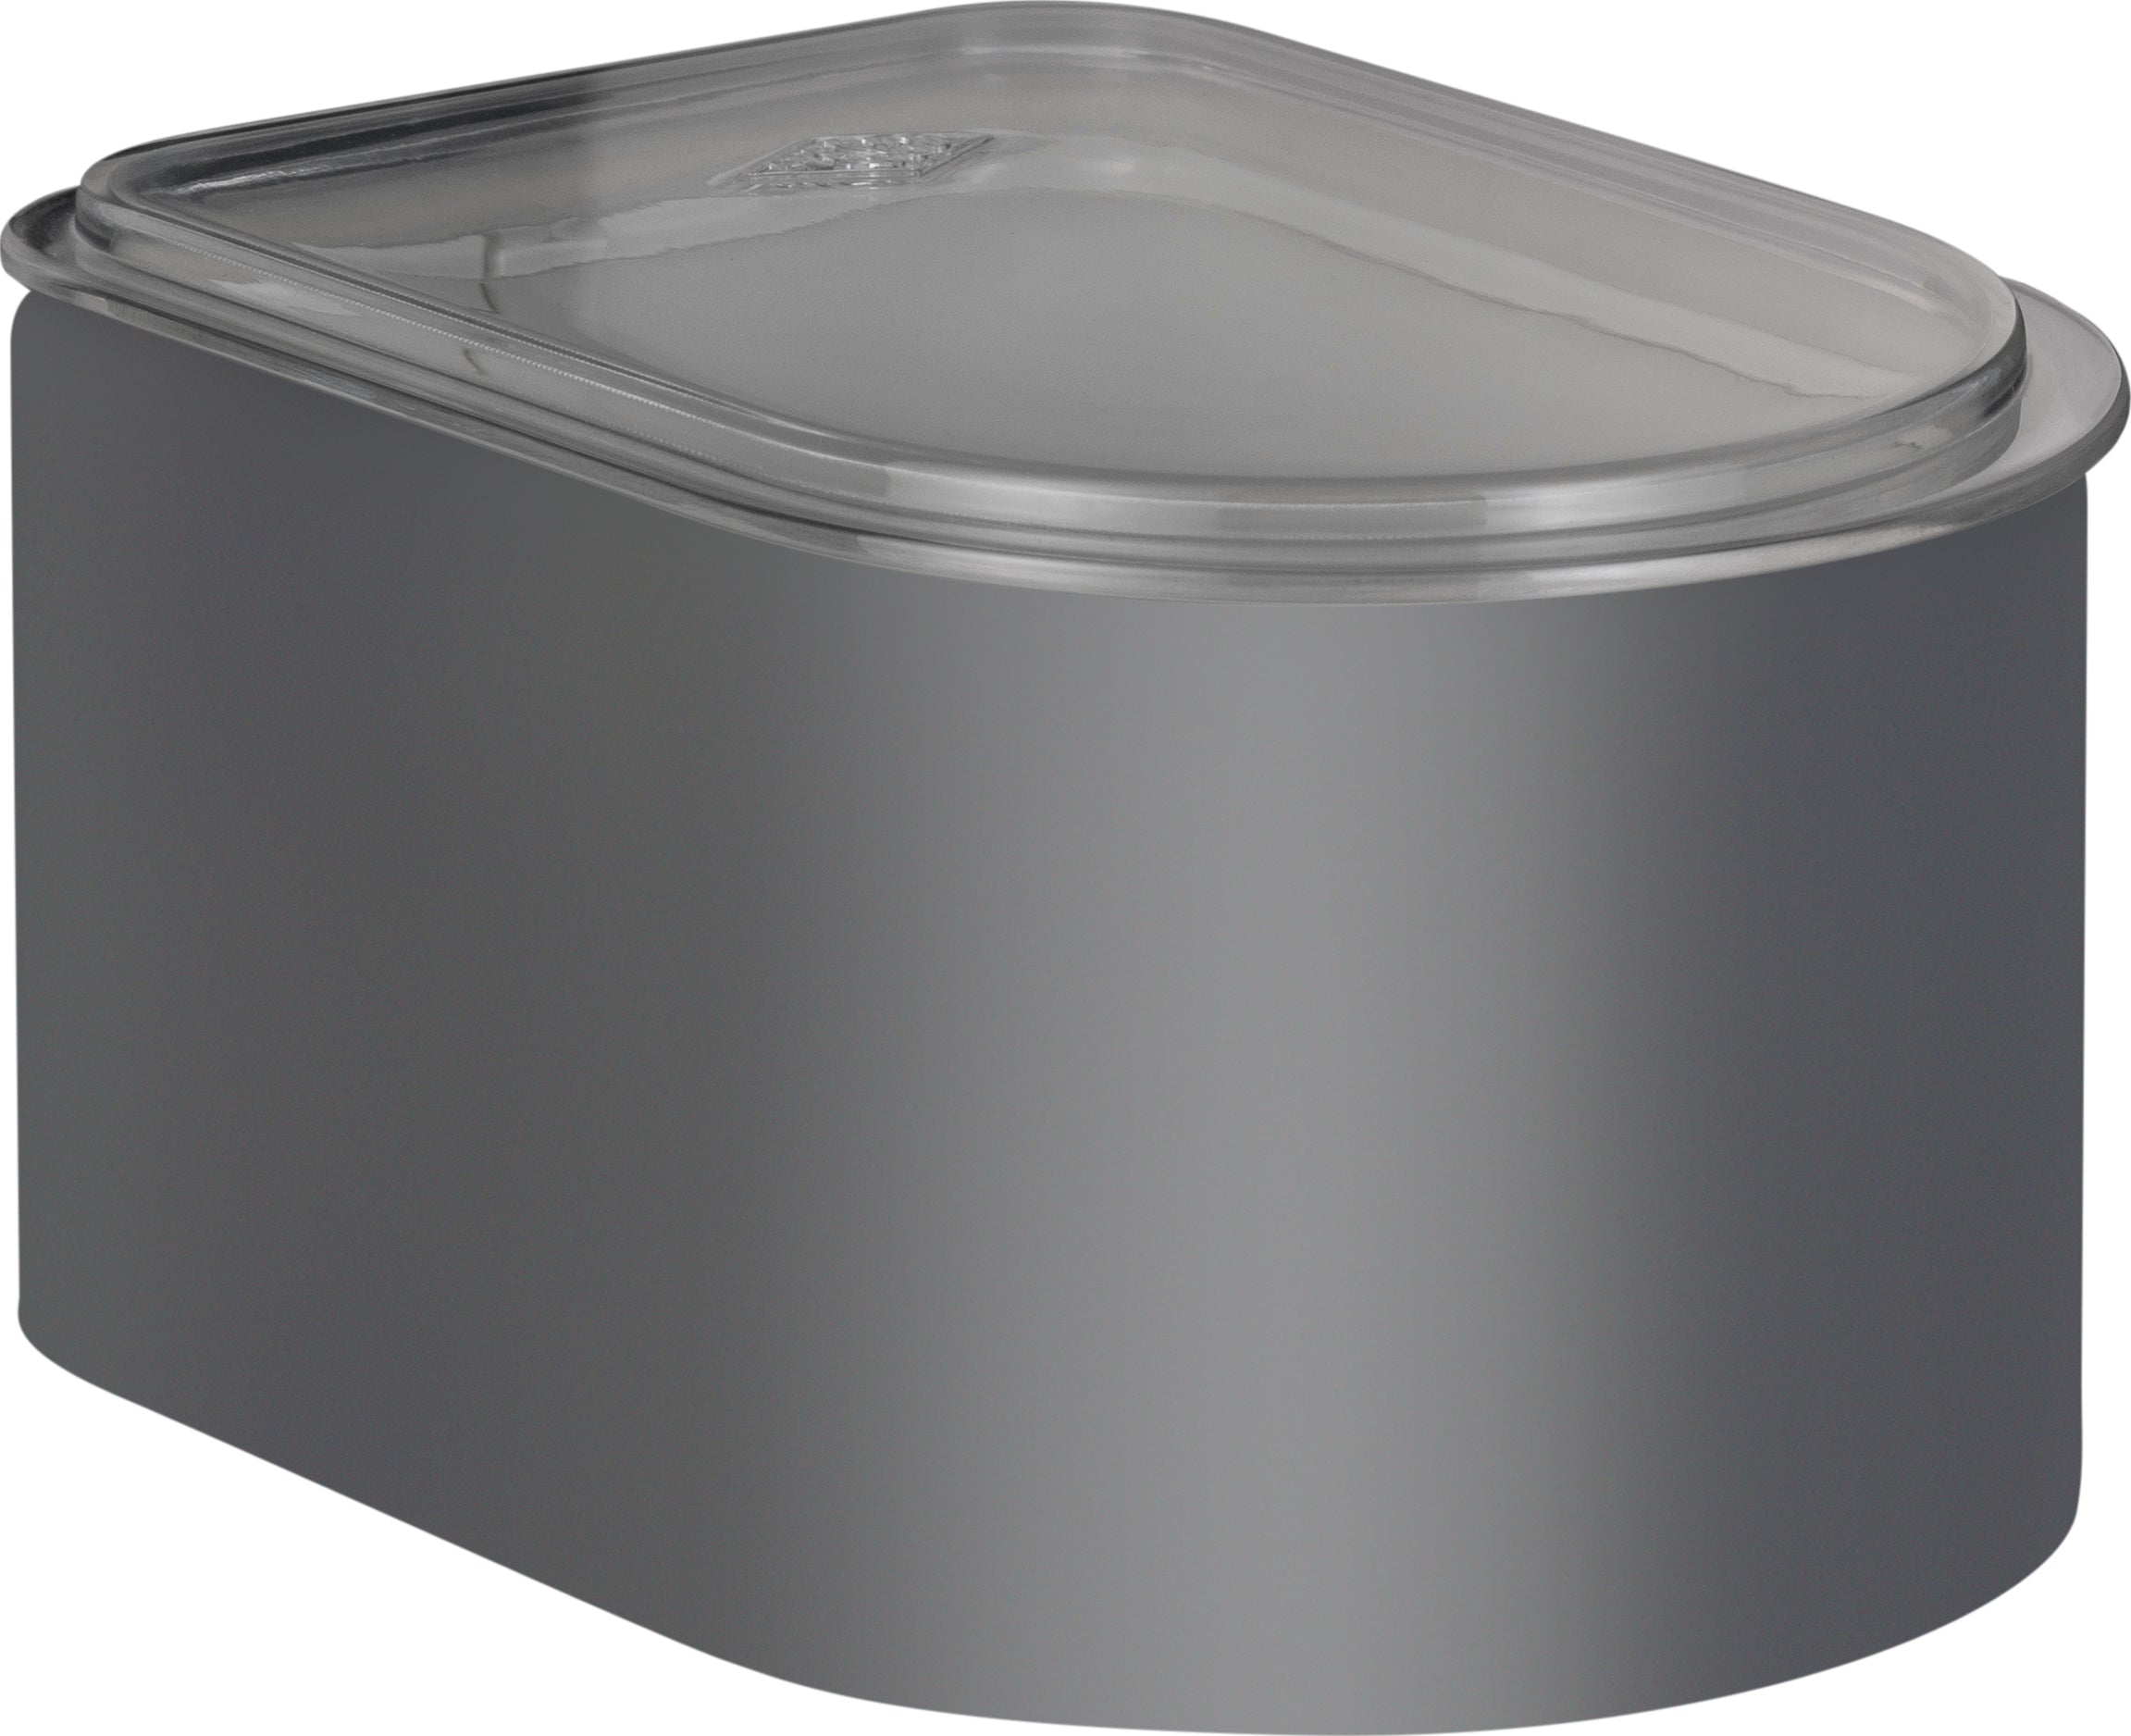 Wesco Canister 1 Litre With Acrylic Lid, Cool Grey Matt